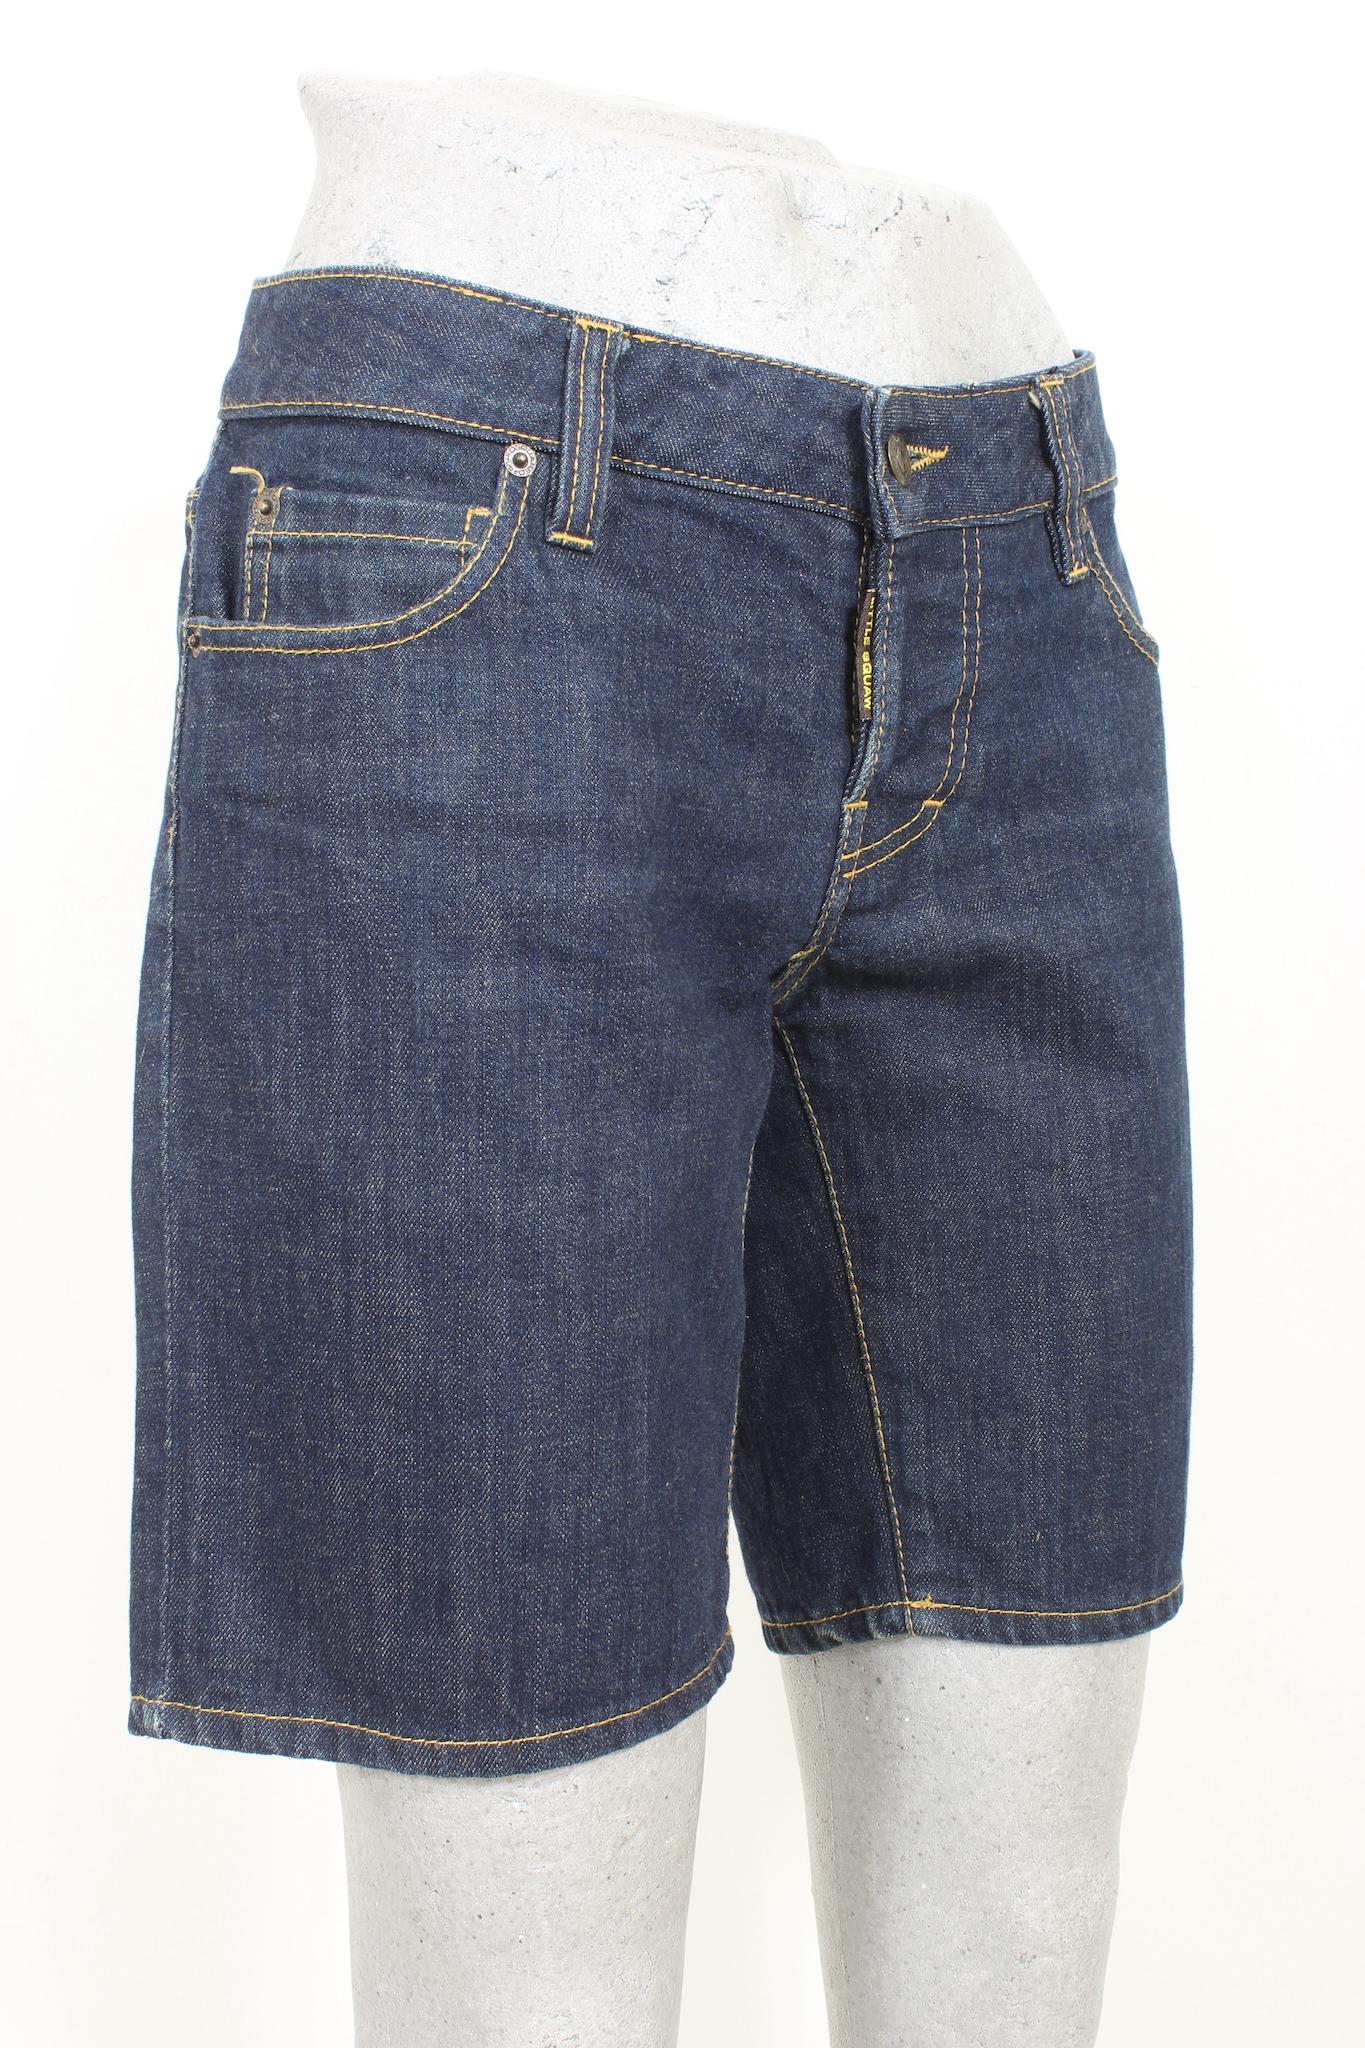 Experience casual style with these Dsquared Blue Cotton Short Denim Trousers from the 2000s. Crafted of 100% cotton in a medium-wash, these jeans promise both comfort and style. Enjoy timeless denim looks with a modern twist.

Size: 42 It 8 Us 10